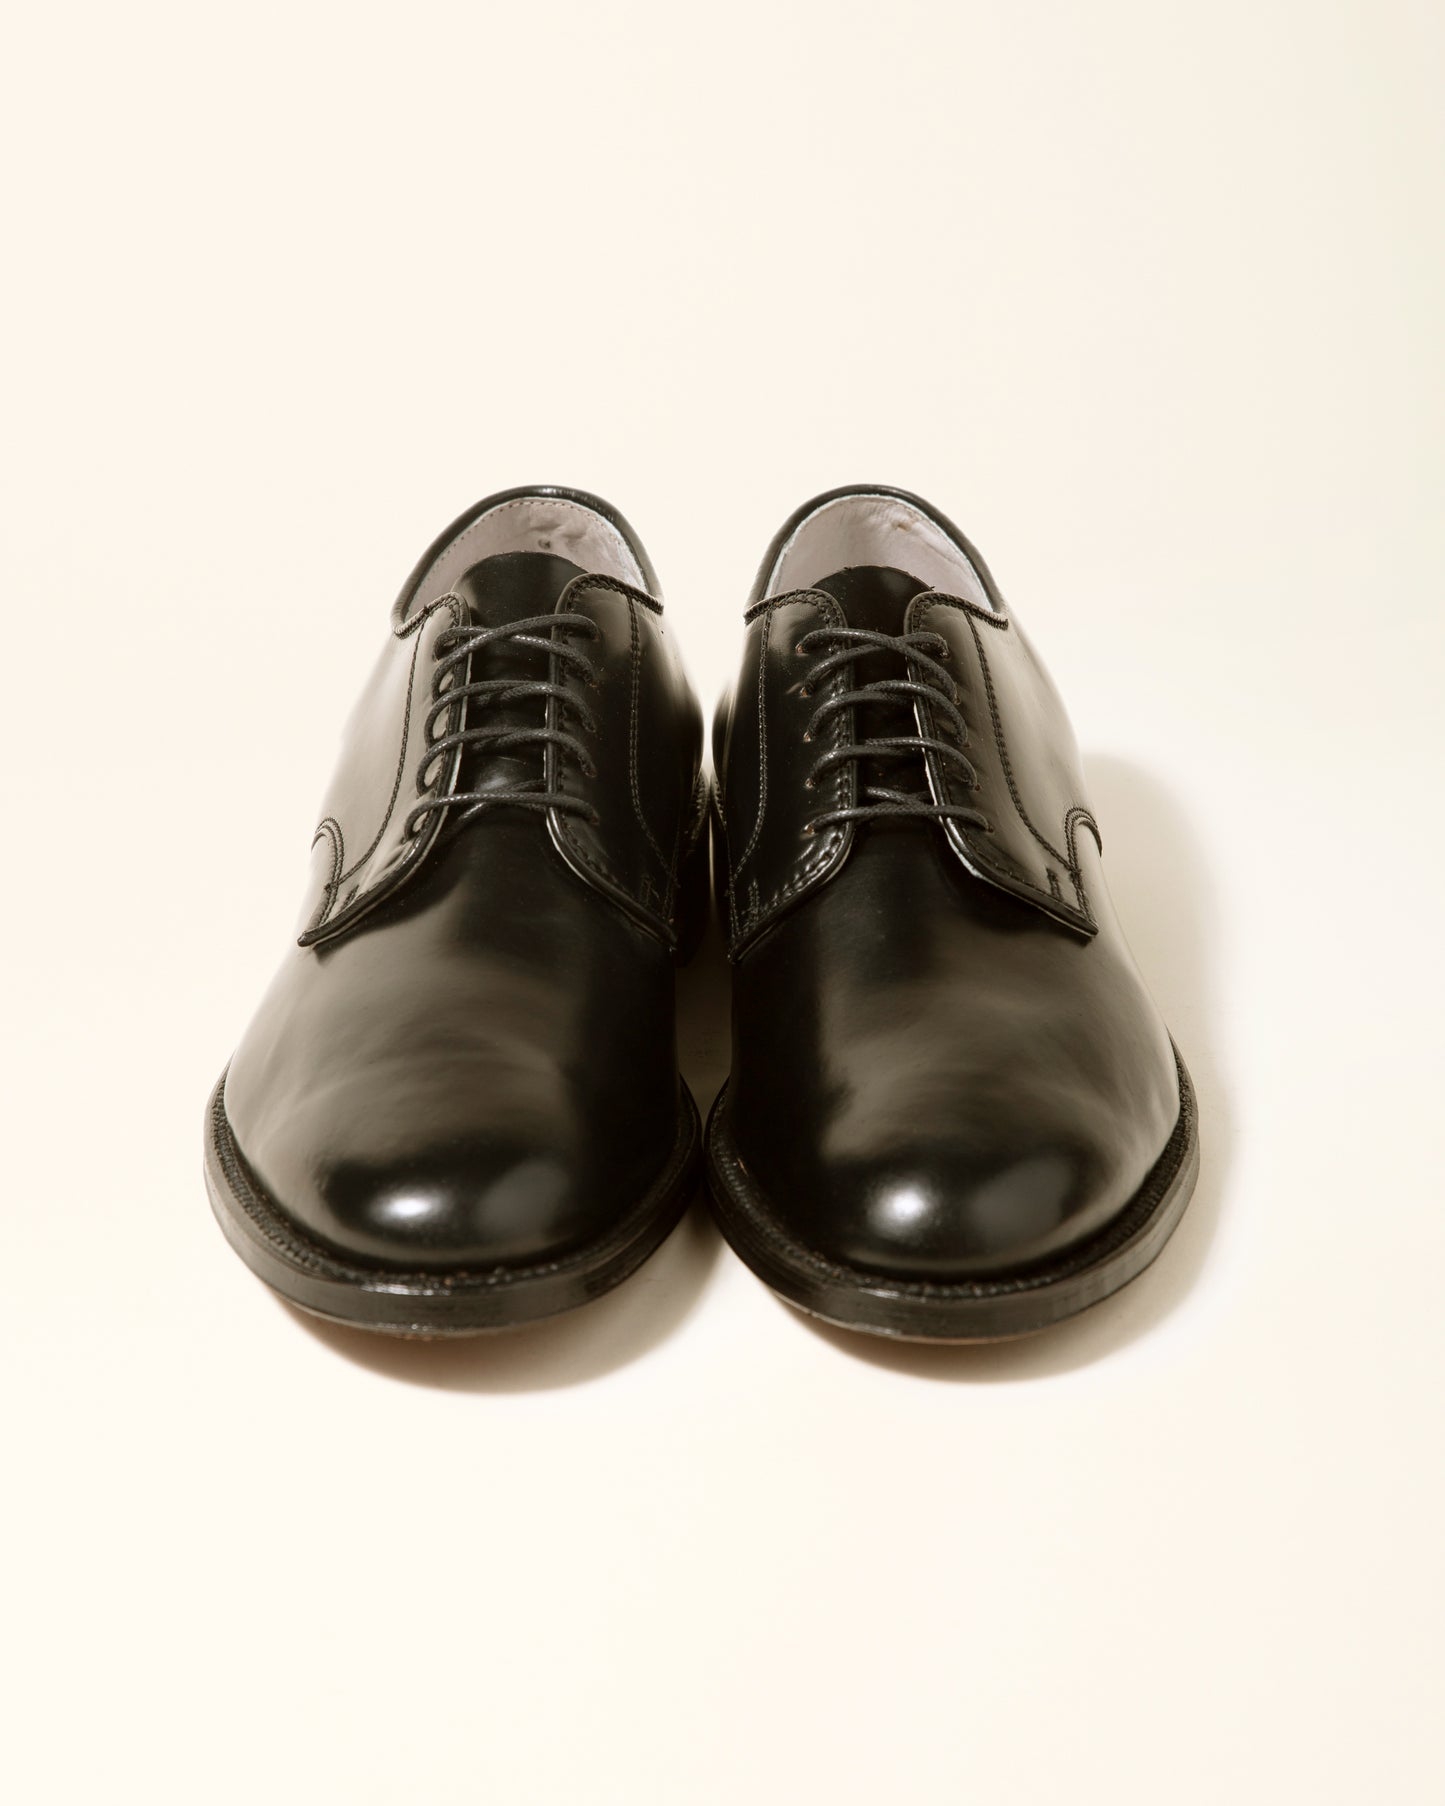 "Victory Heights" Unlined Plain Toe Dover - Black Shell Cordovan